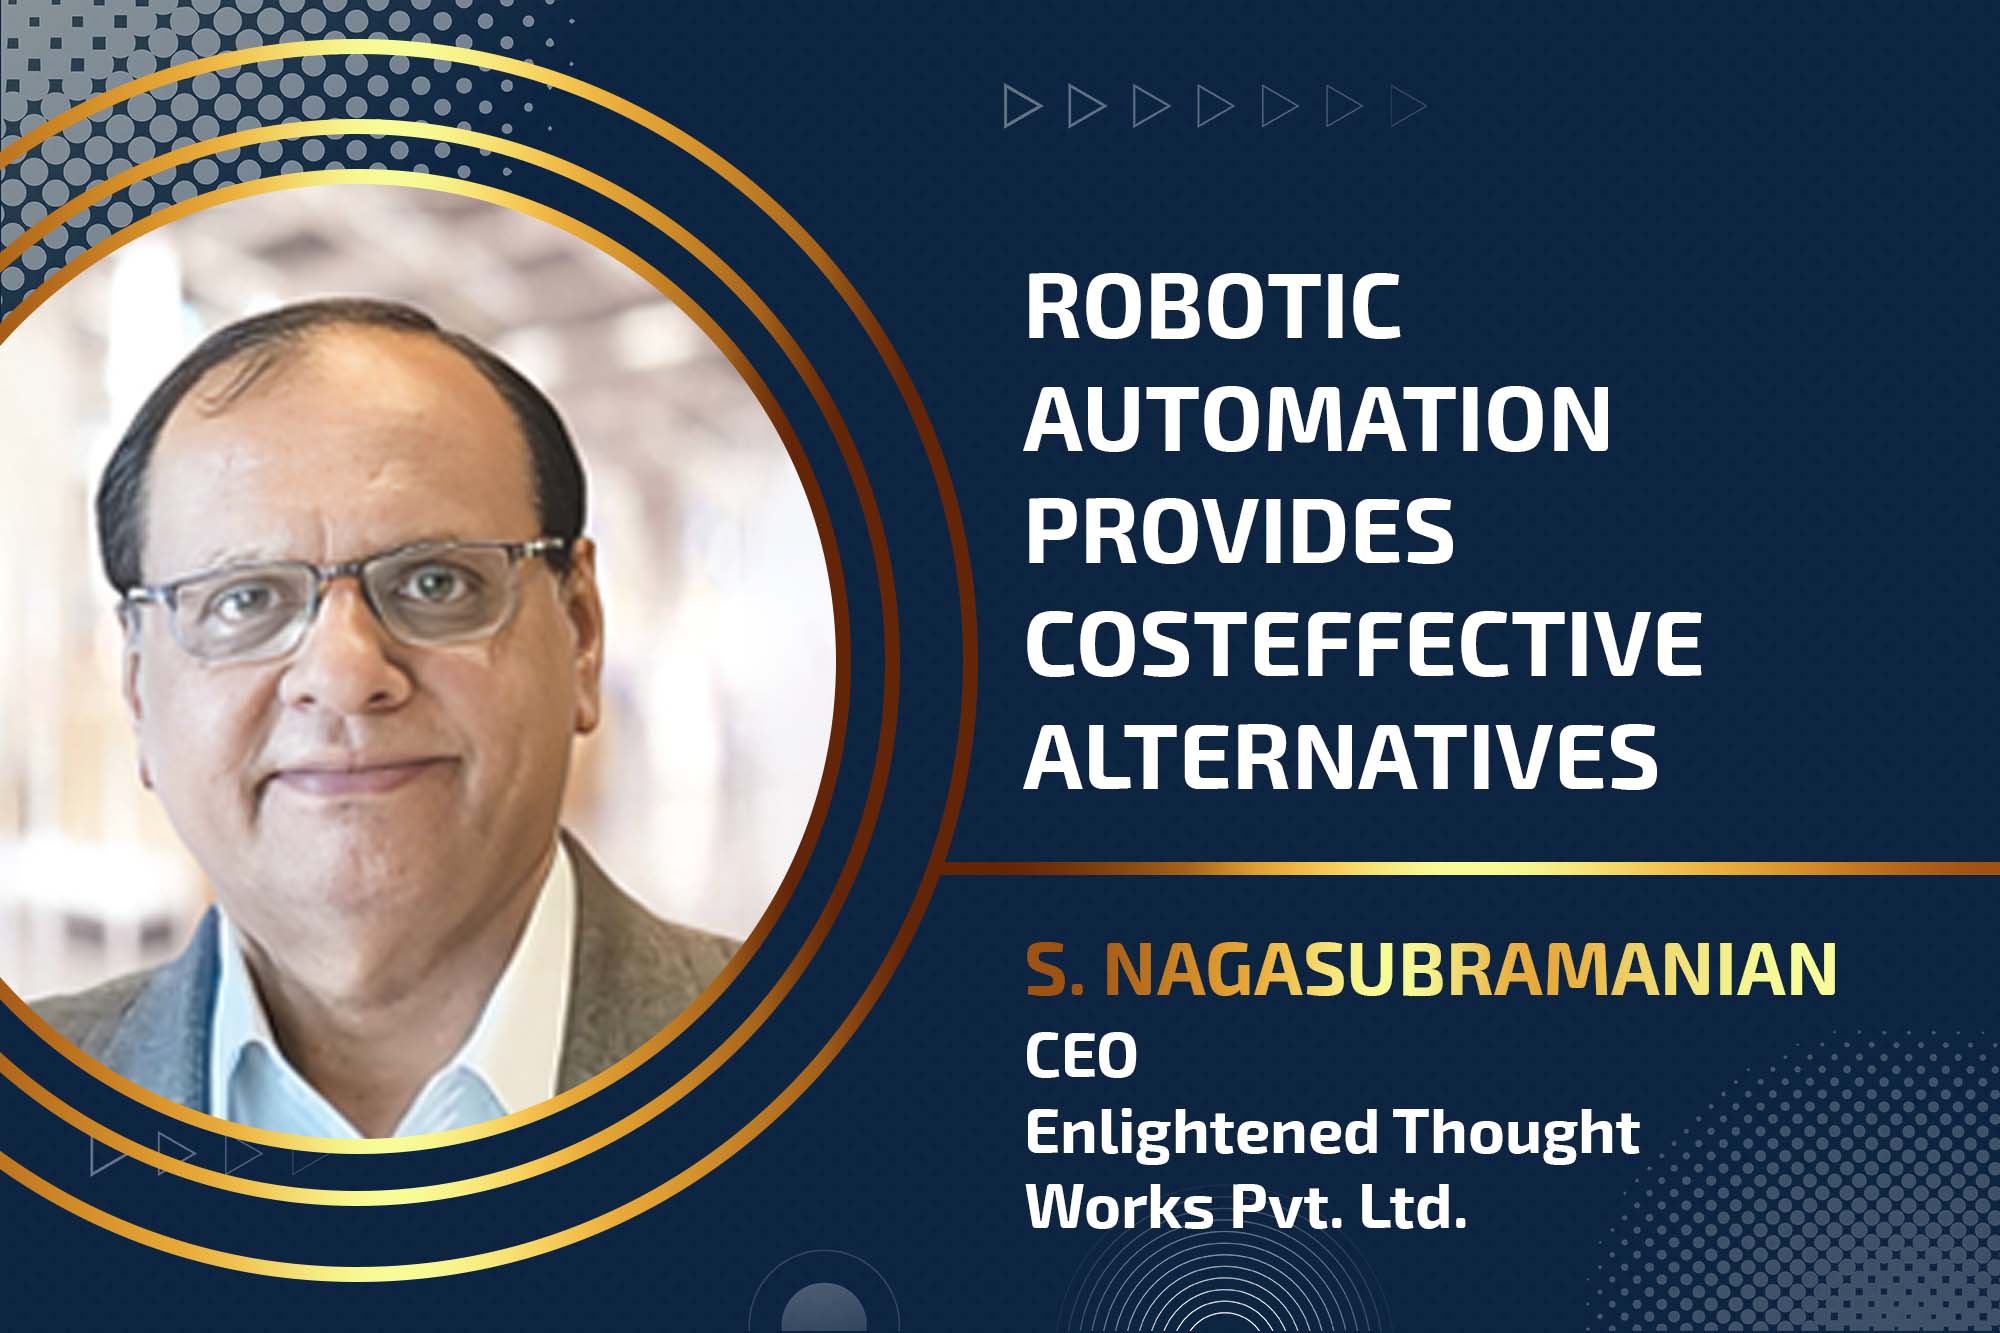 Robotic automation provides cost-effective alternatives